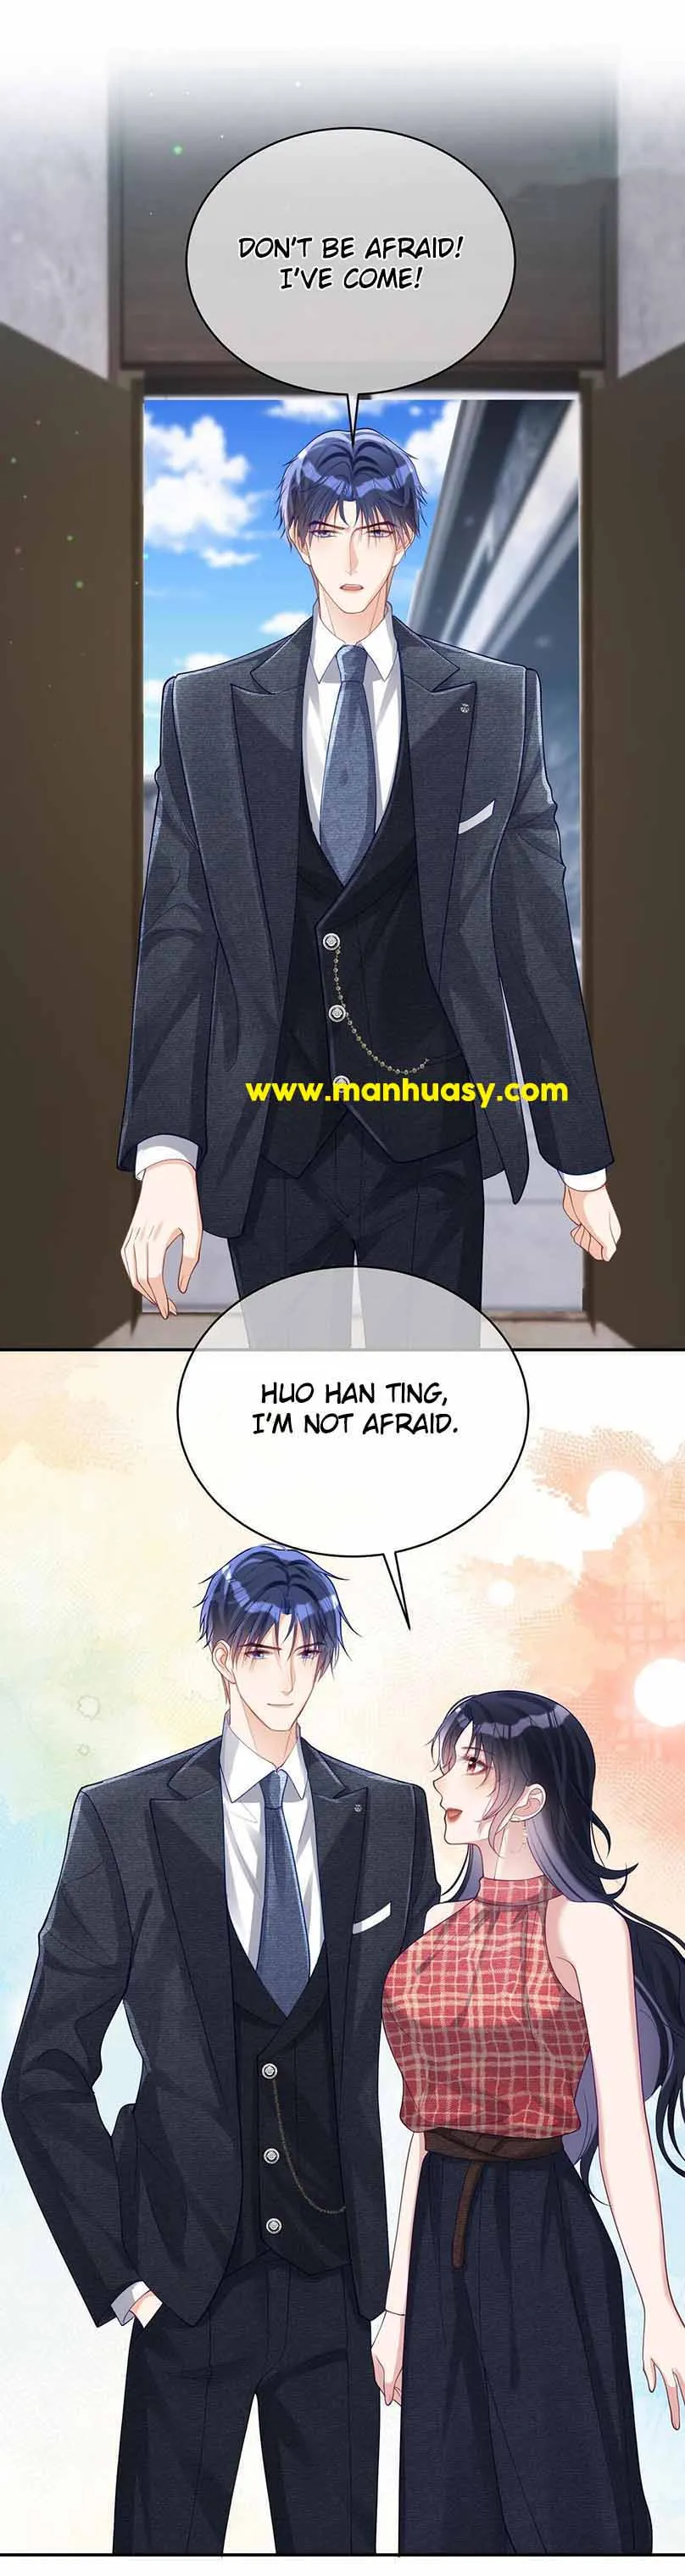 Cute Baby From Heaven: Daddy is Too Strong chapter 45